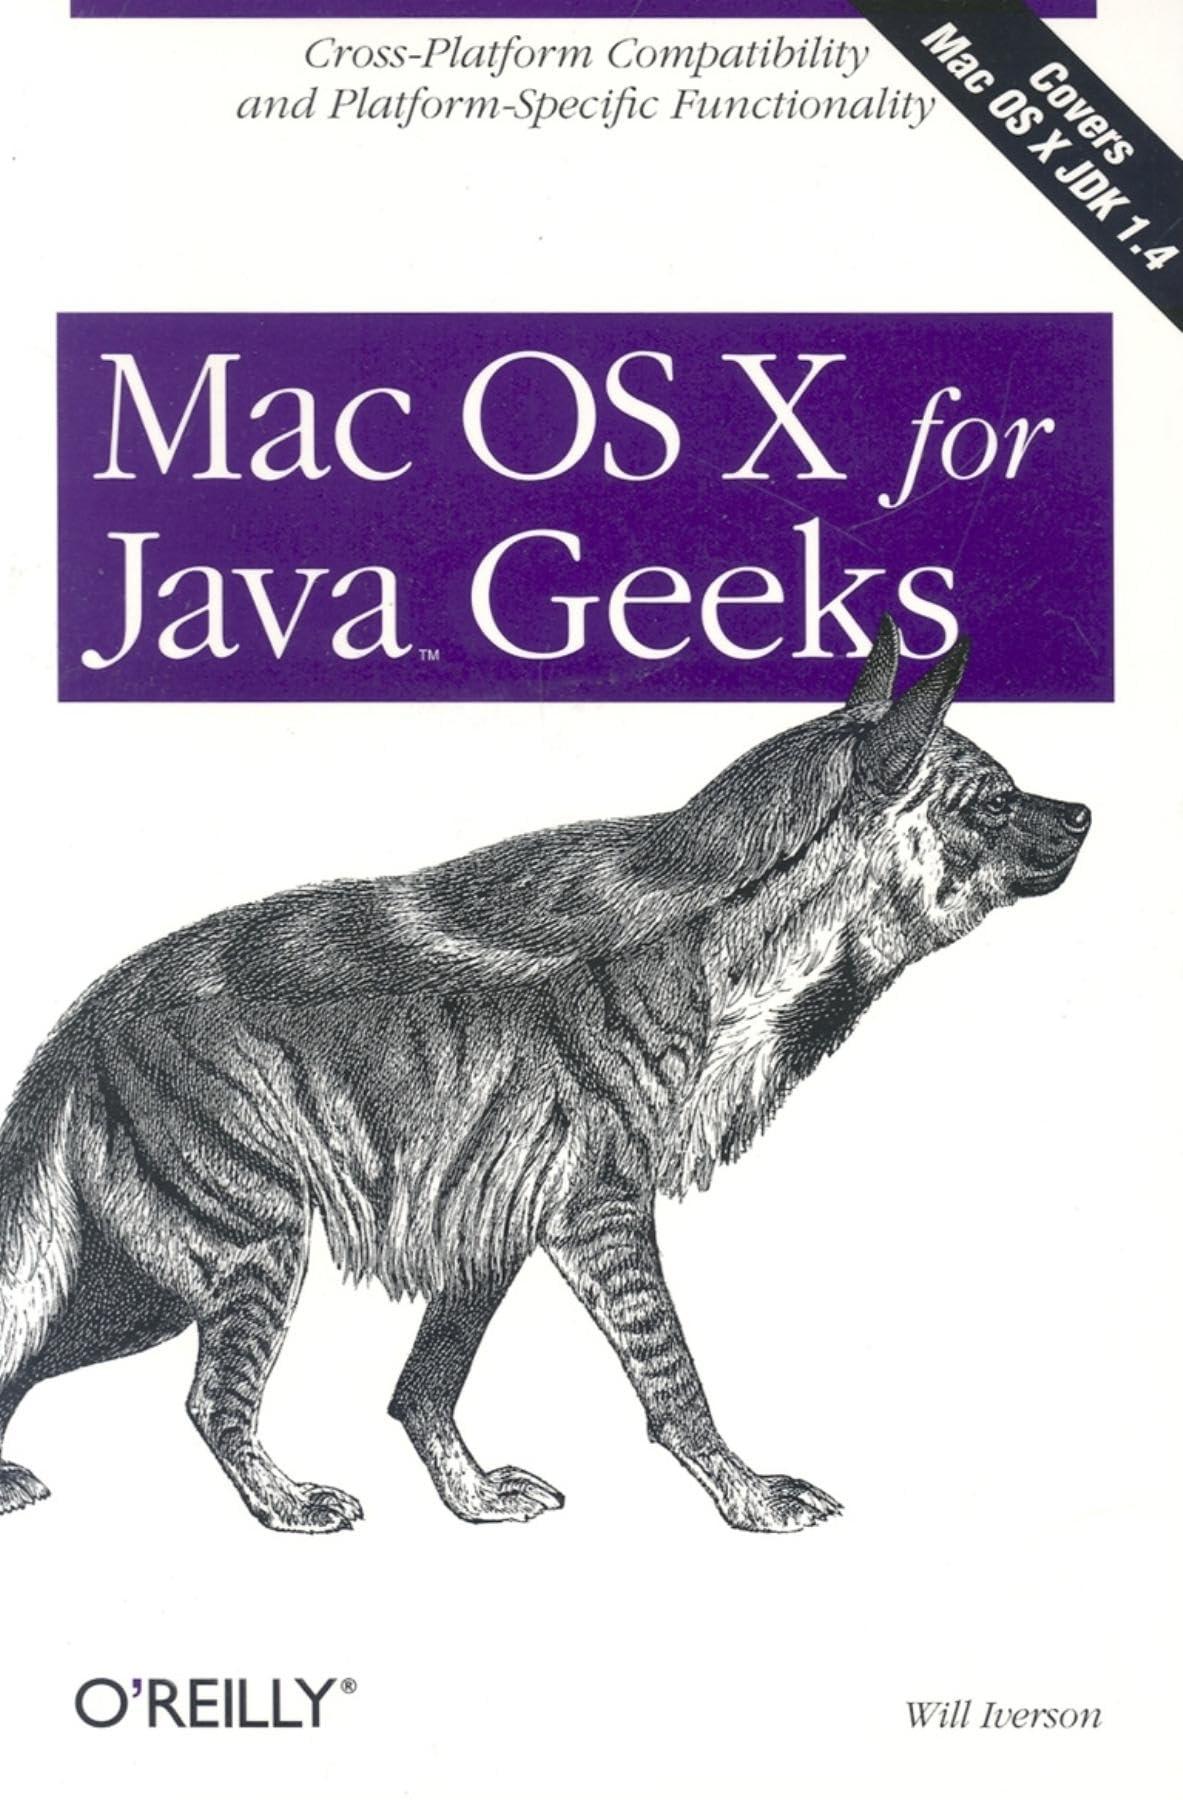 mac os x for java geeks 1st edition will iverson 0596004001, 978-0596004002